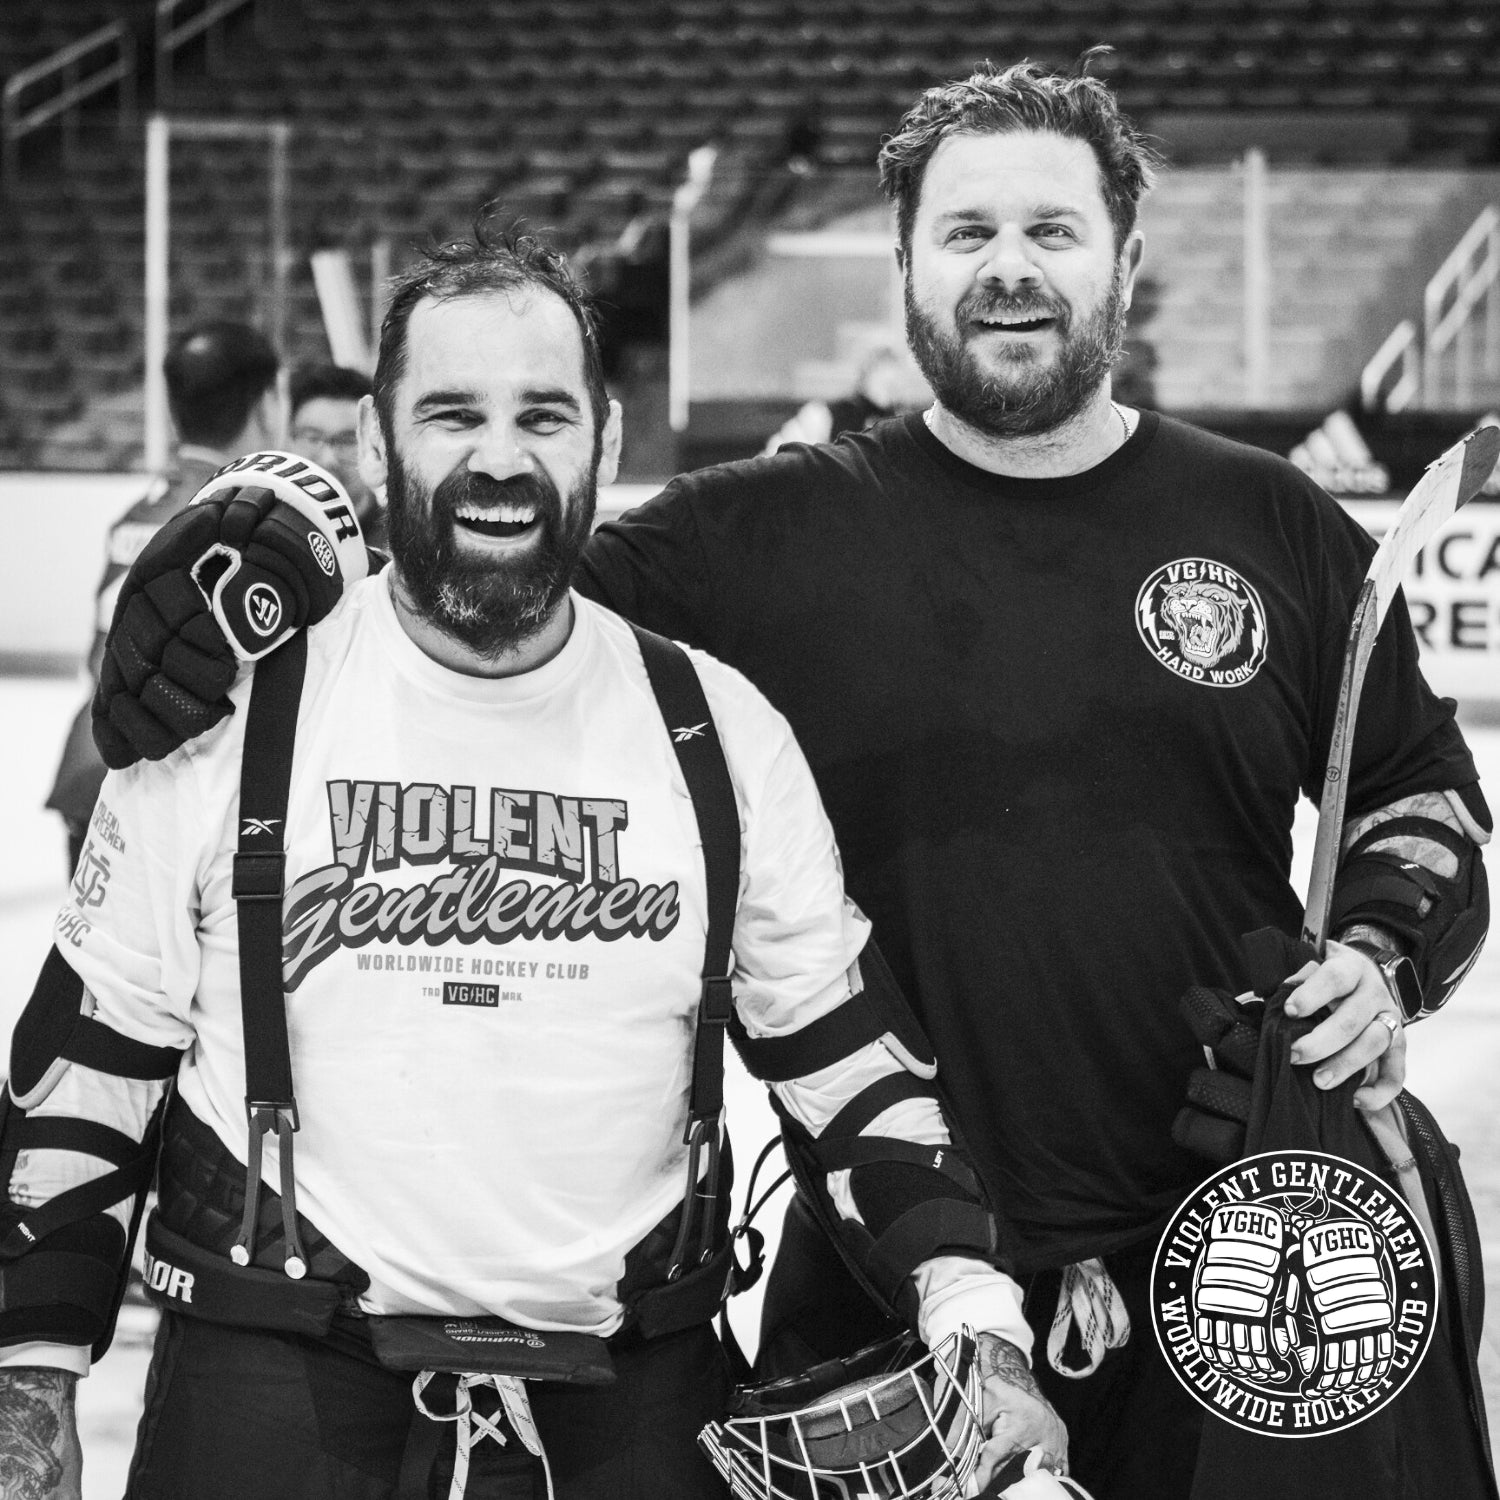 Brian Talbert and Mike Hammer - the two co-owners of Delseyfly metoparis hockey club clothing company started in 2011